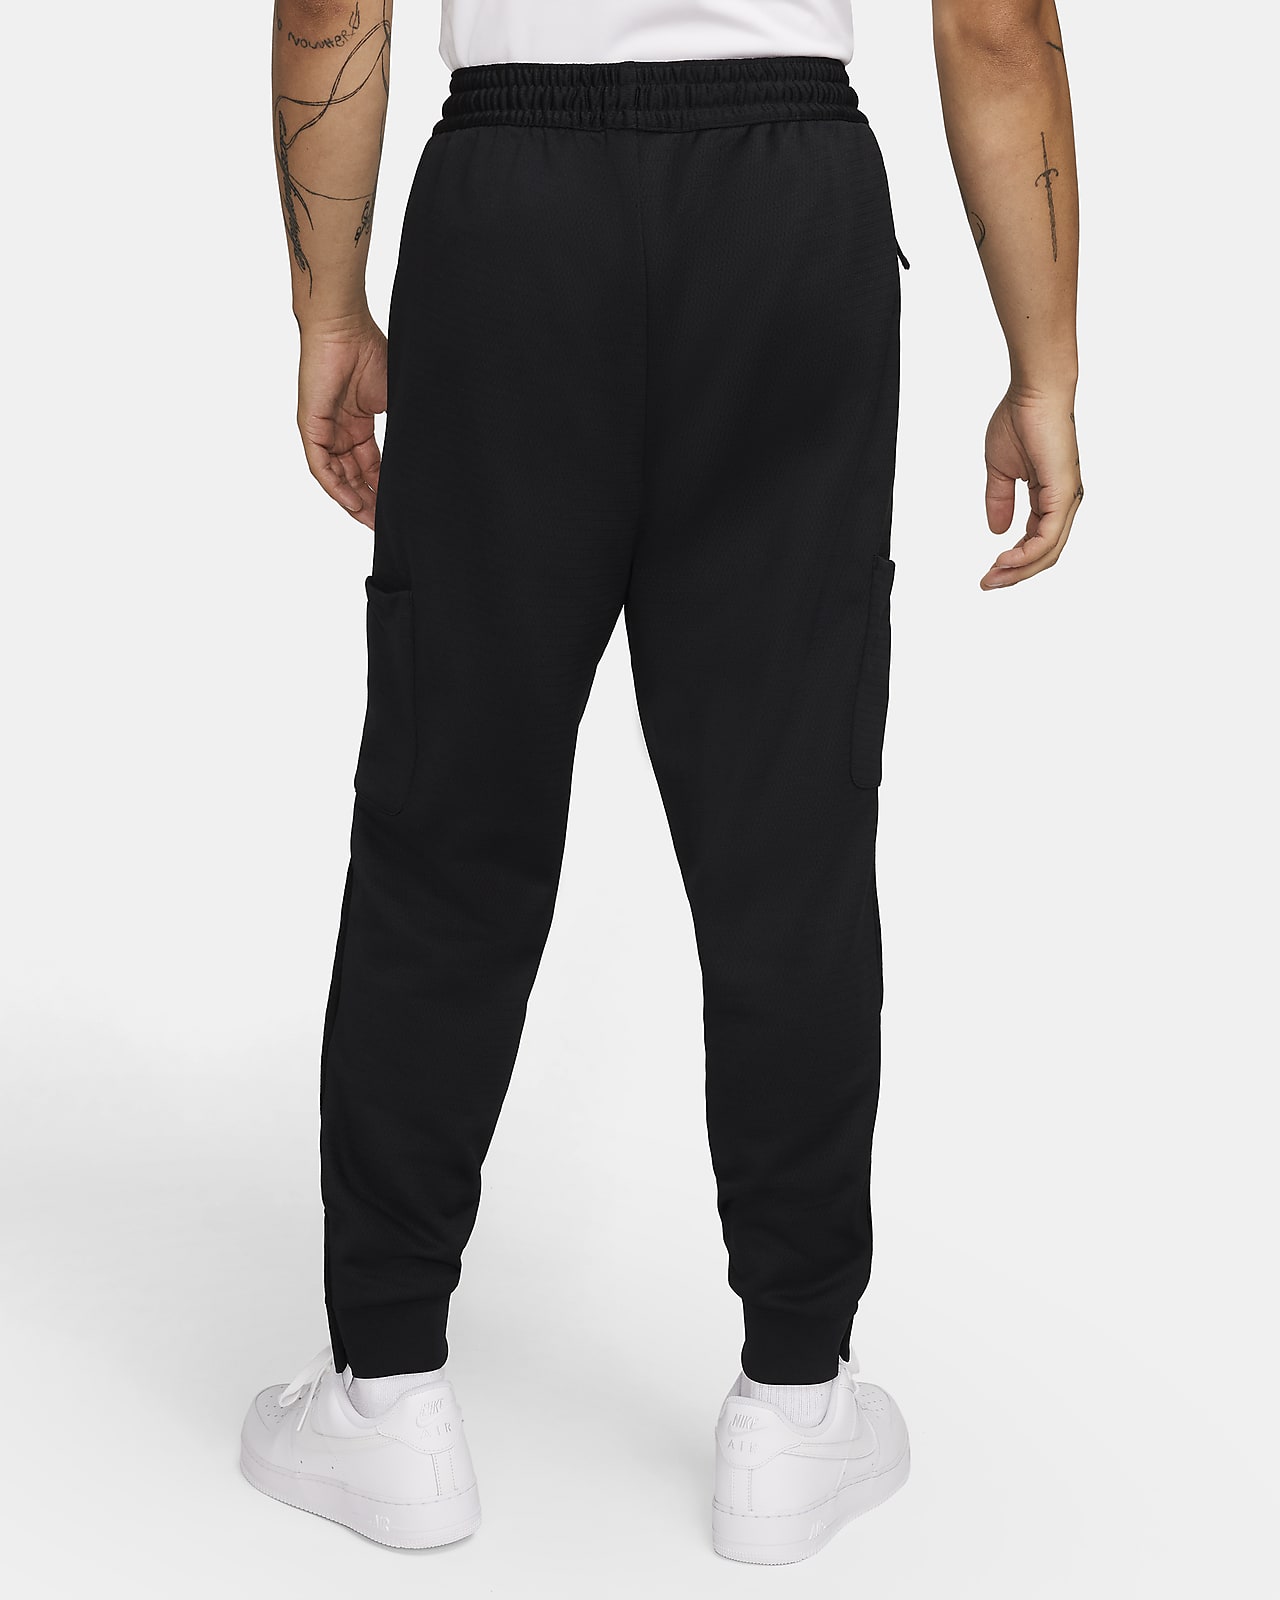 Shop Nike Basketball Compression Pants with great discounts and